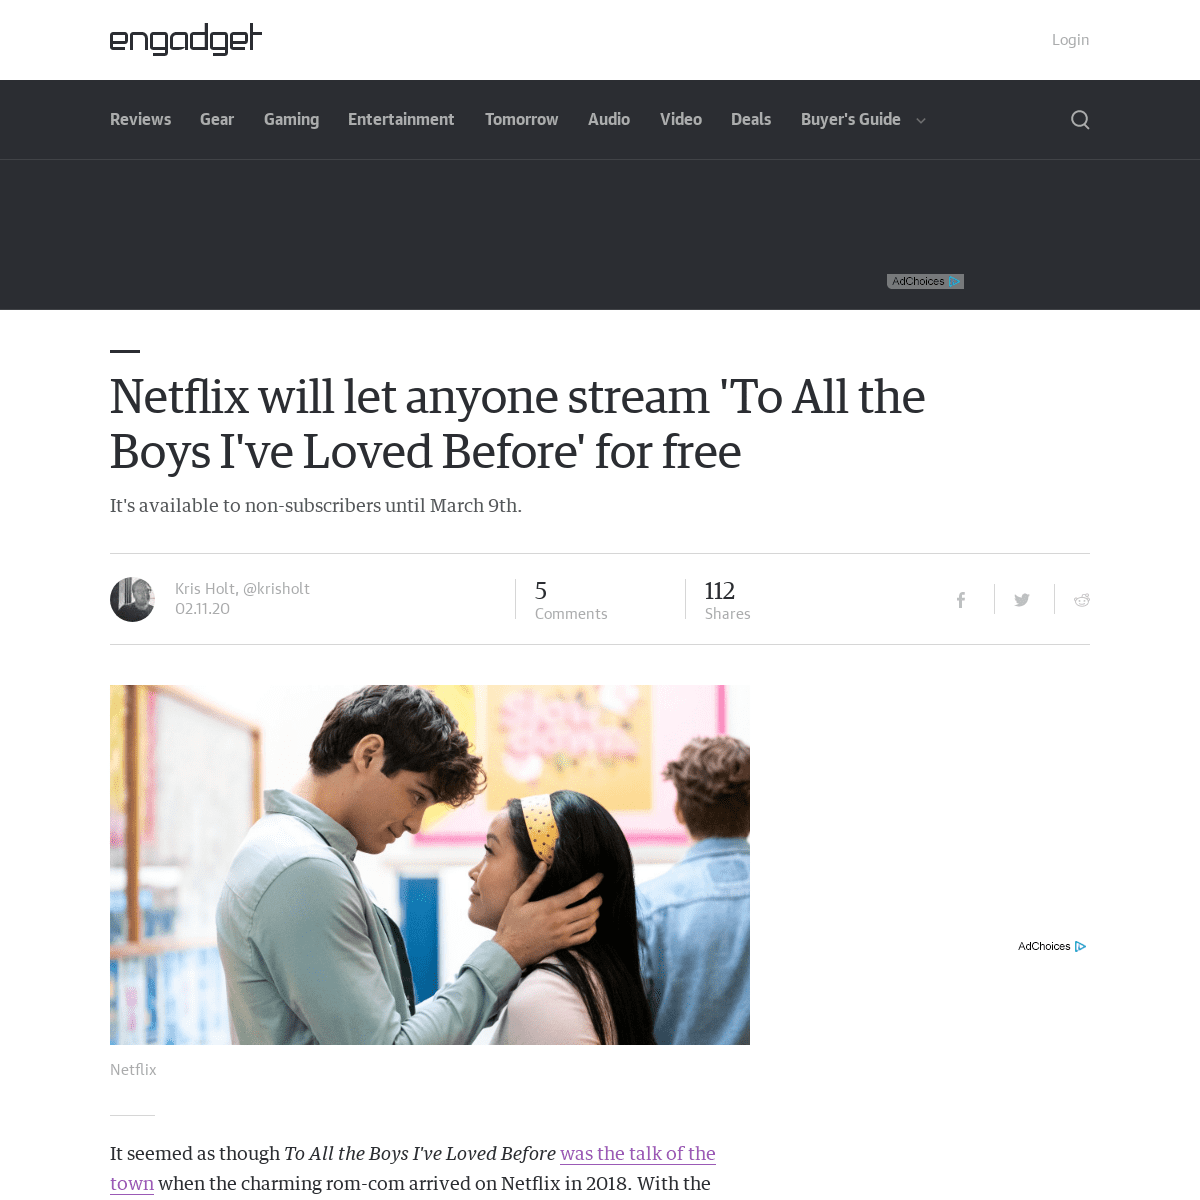 A complete backup of www.engadget.com/2020/02/11/netflix-to-all-the-boys-ive-loved-before-streaming-free/